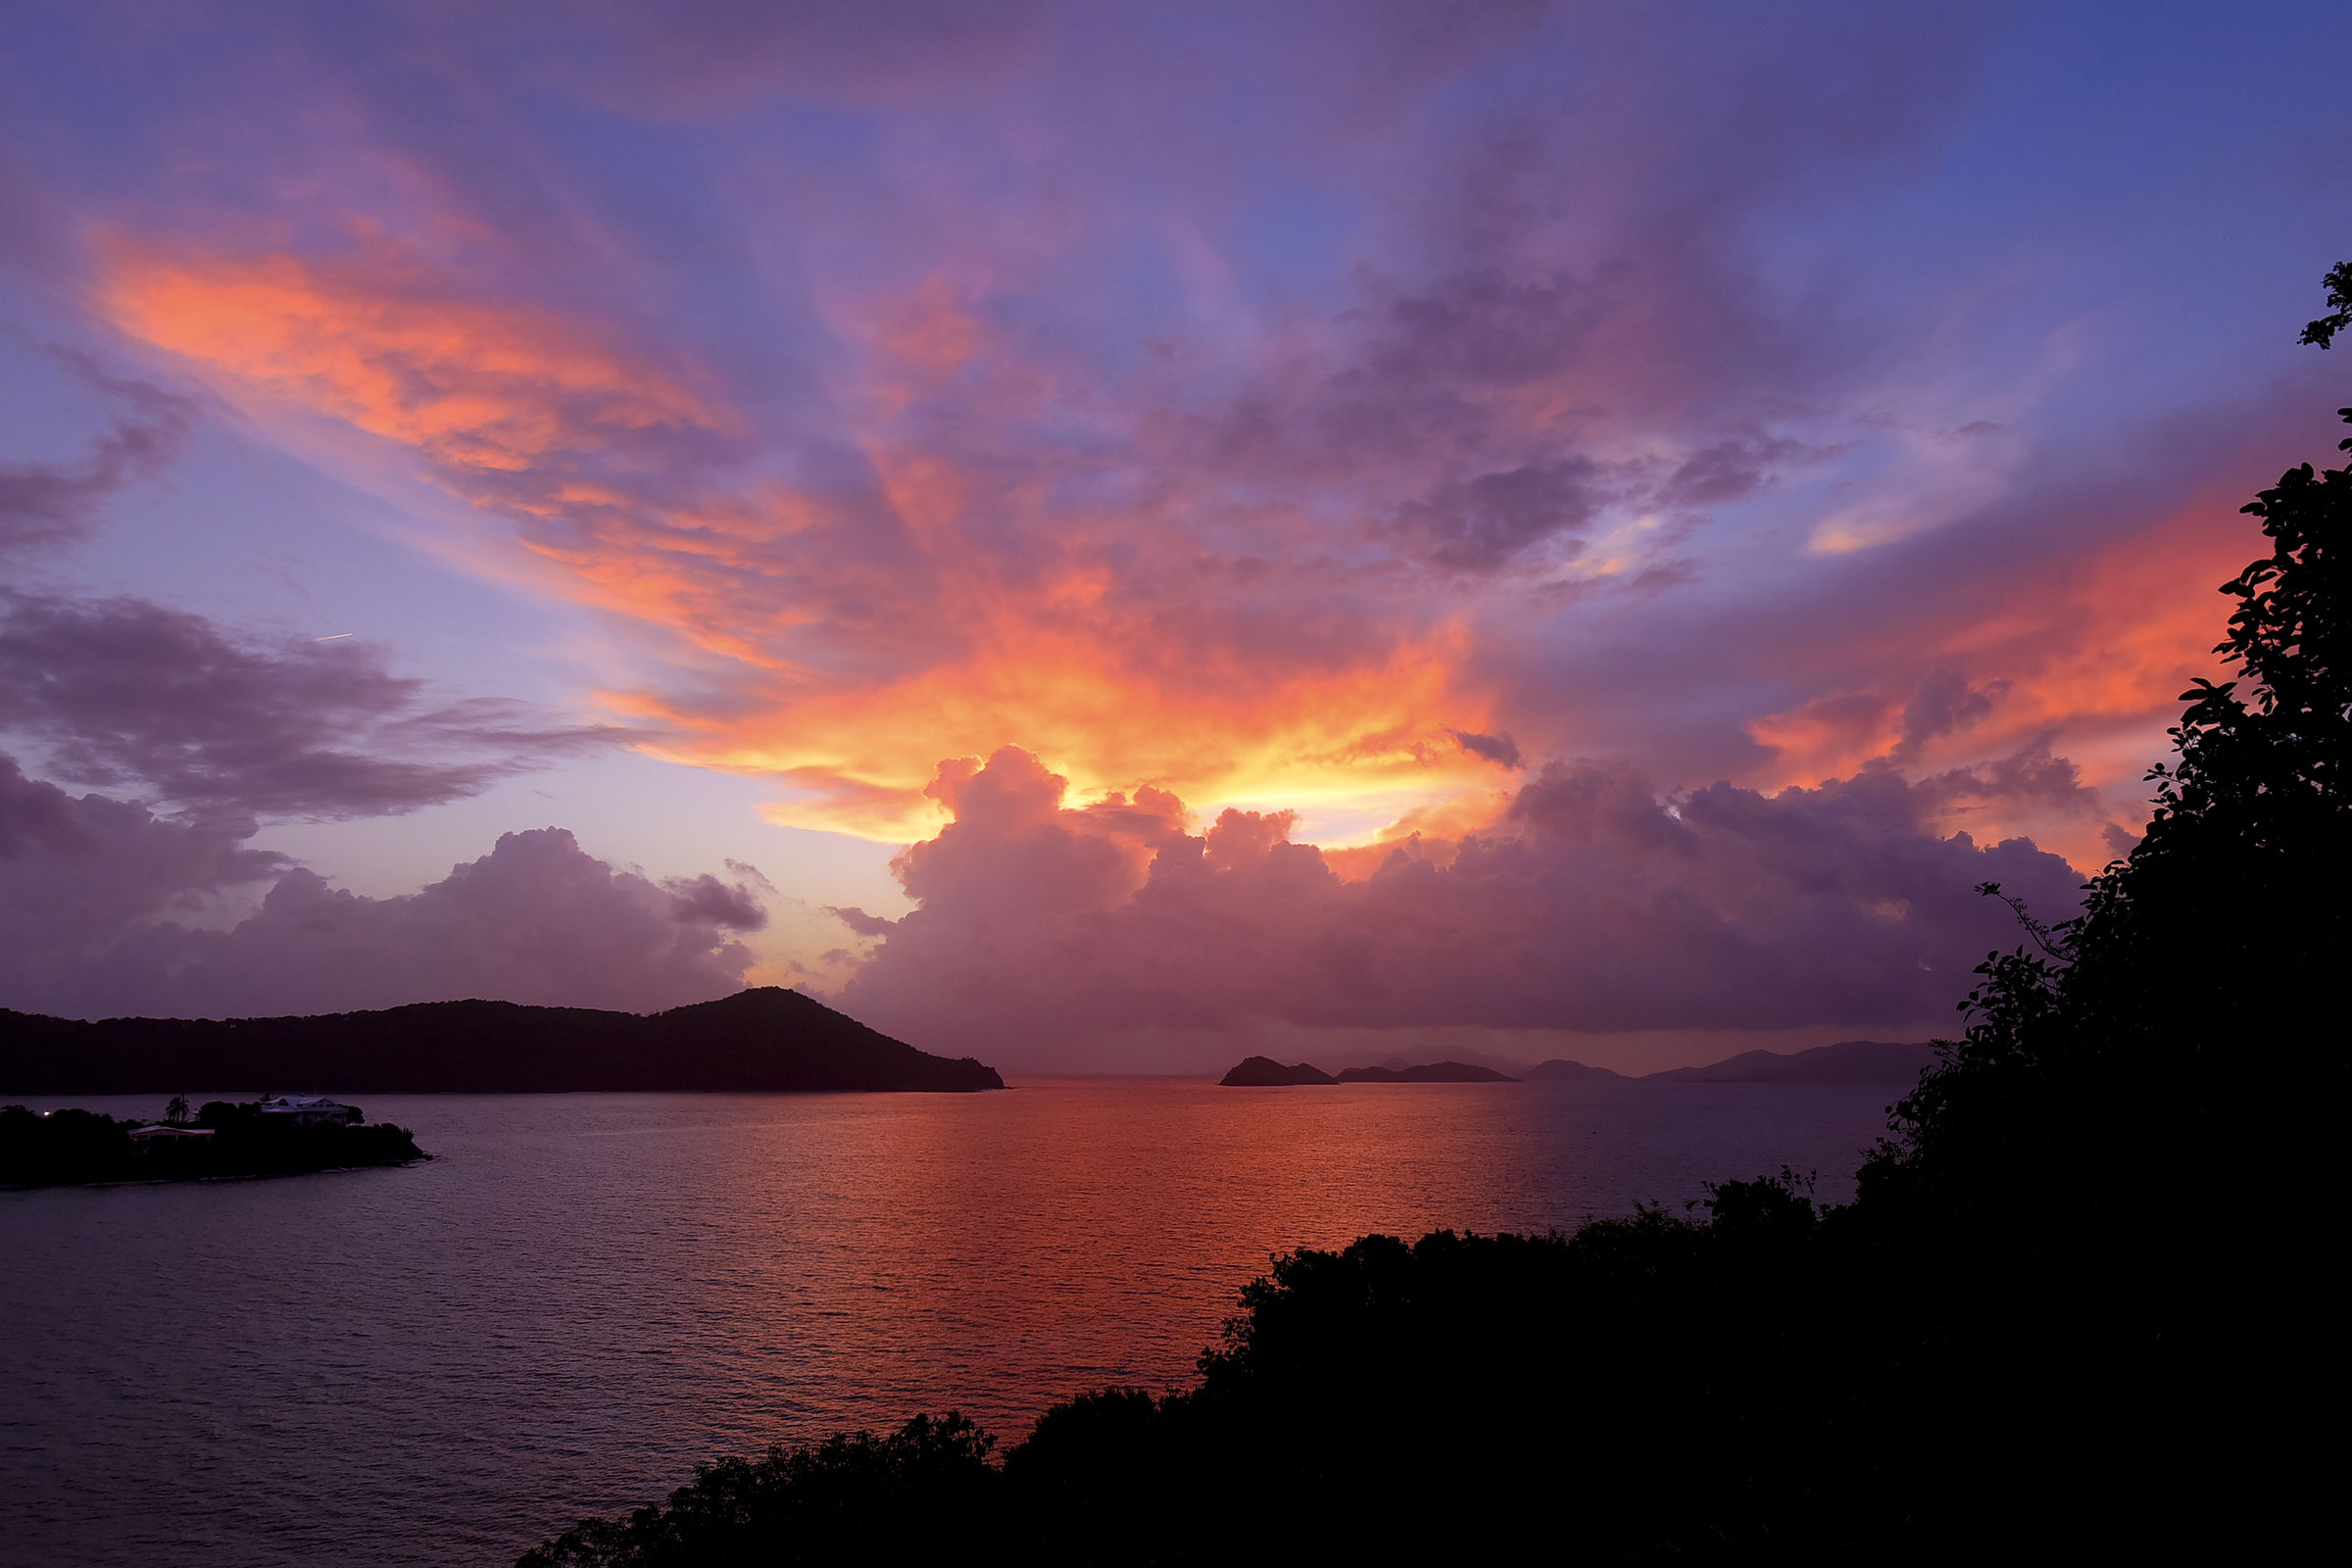 Sunset over the US Virgin Islands